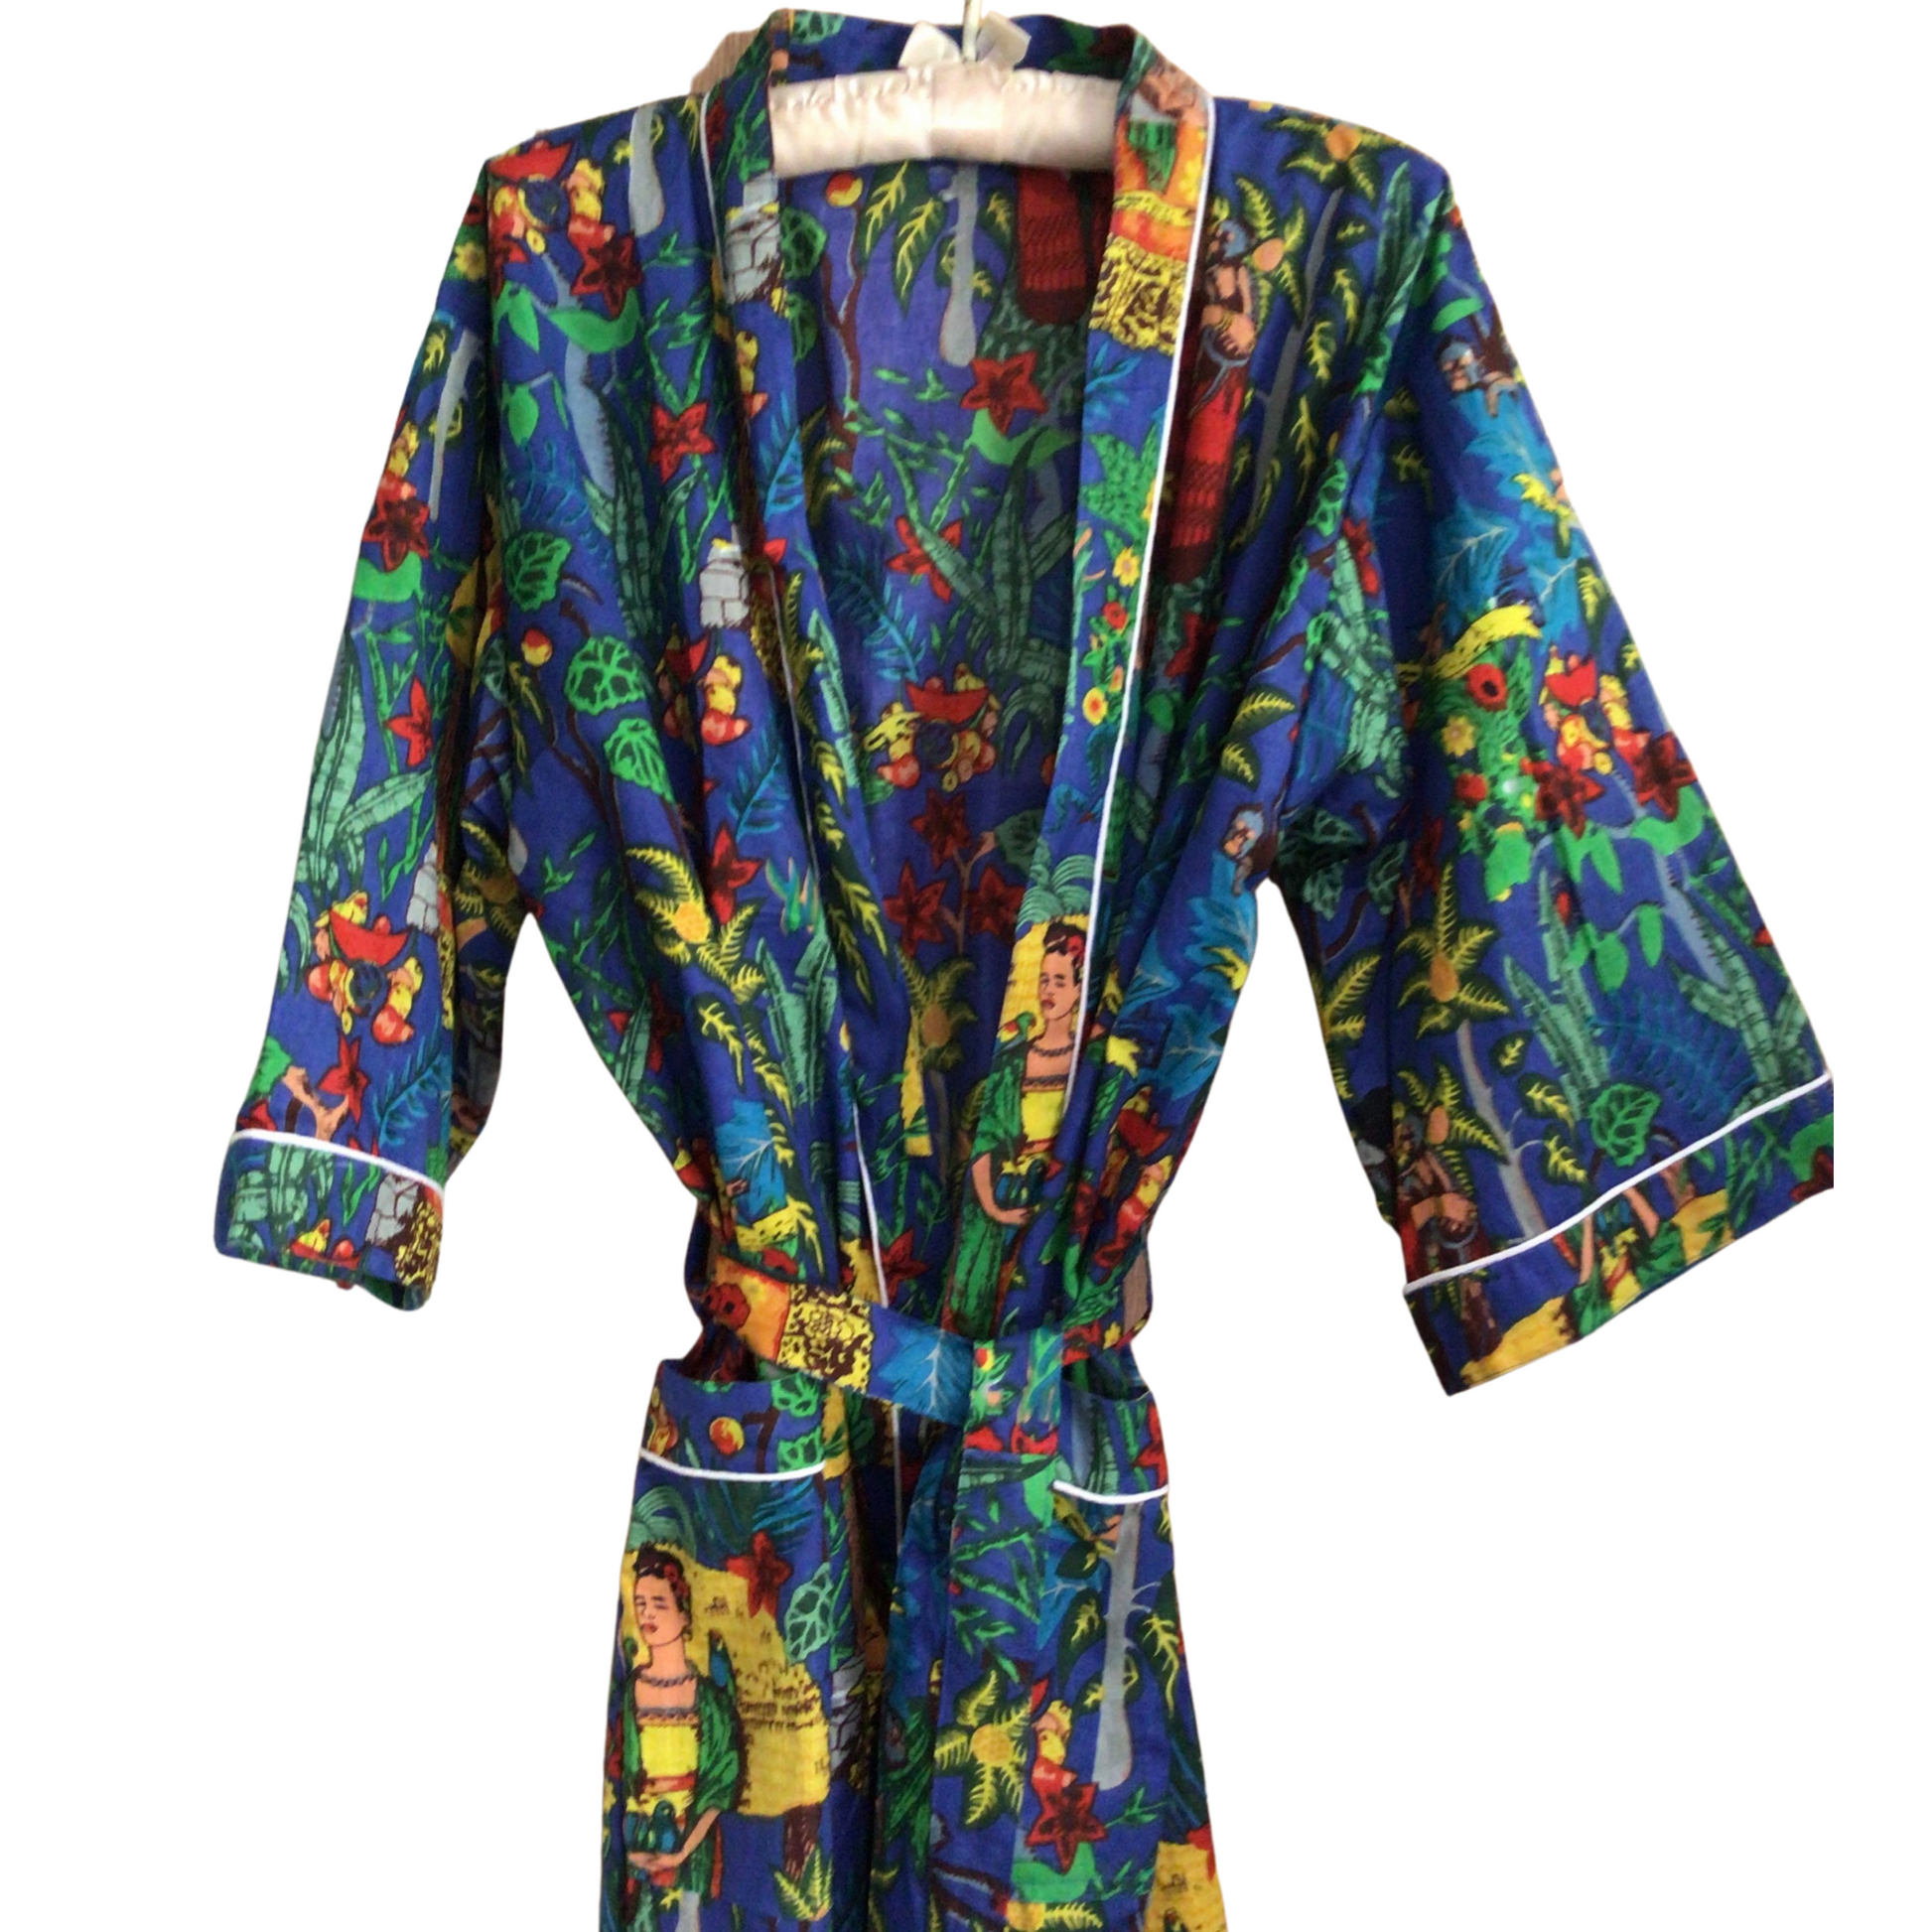 Frida.100% cotton kimono style dressing gown. Blue background, printed vibrant colours. Whacky design. Monkeys, parrots, and Frida Kahlo, the iconic Mexican artist. ladies dressing gown, dressing gown for women, kimono dressing gown, colourful womens sleepwear, cotton dressing gown,